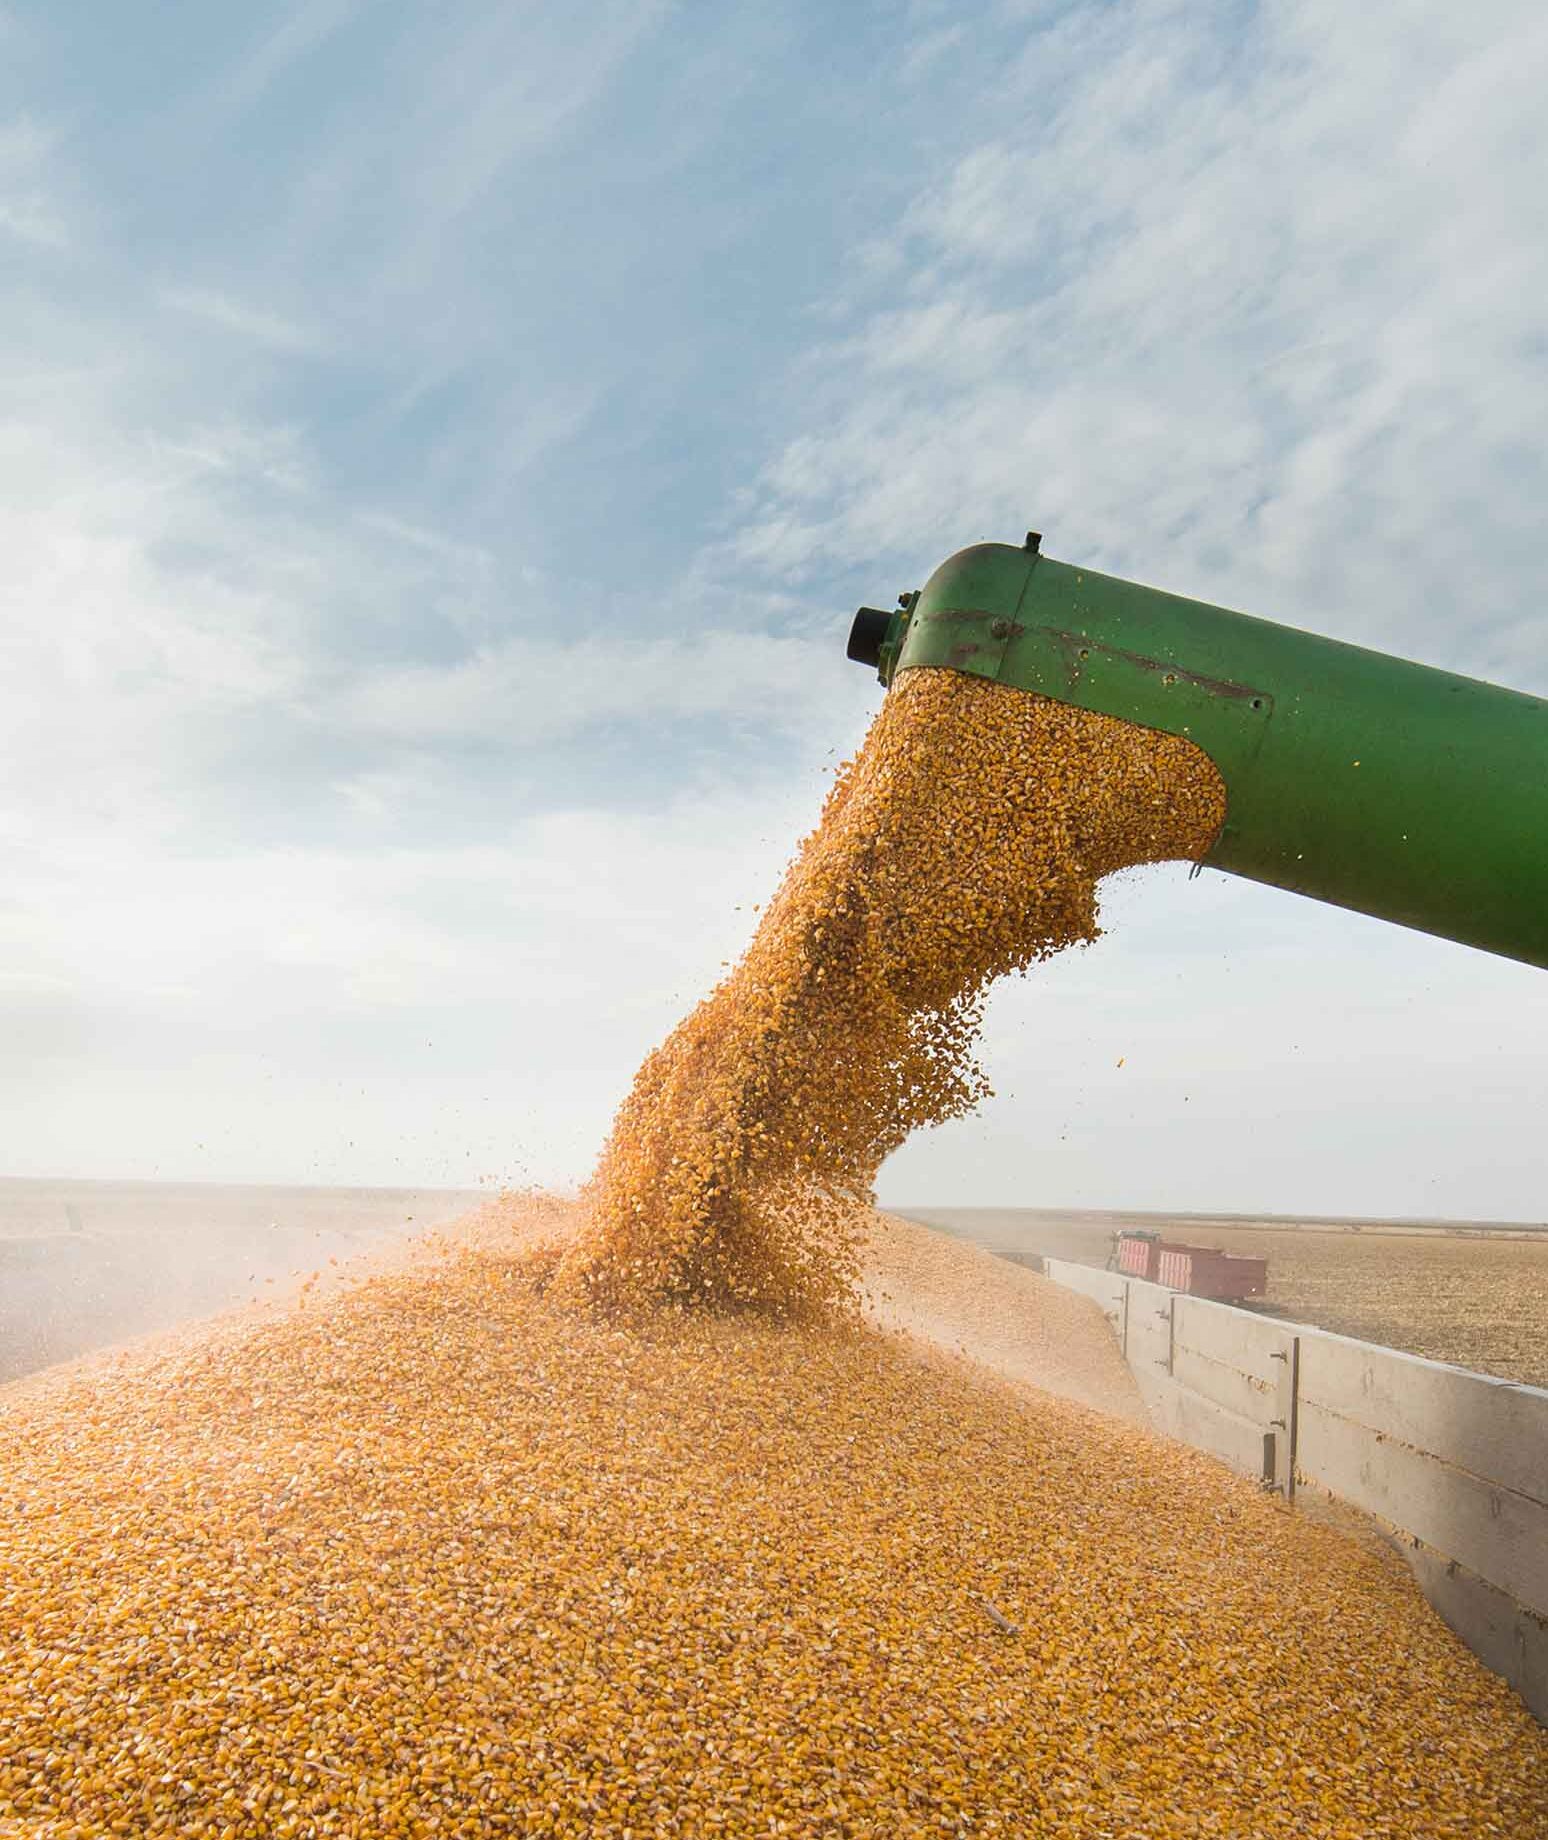 The end of a green grain chute pouring corn into a large container of corn.